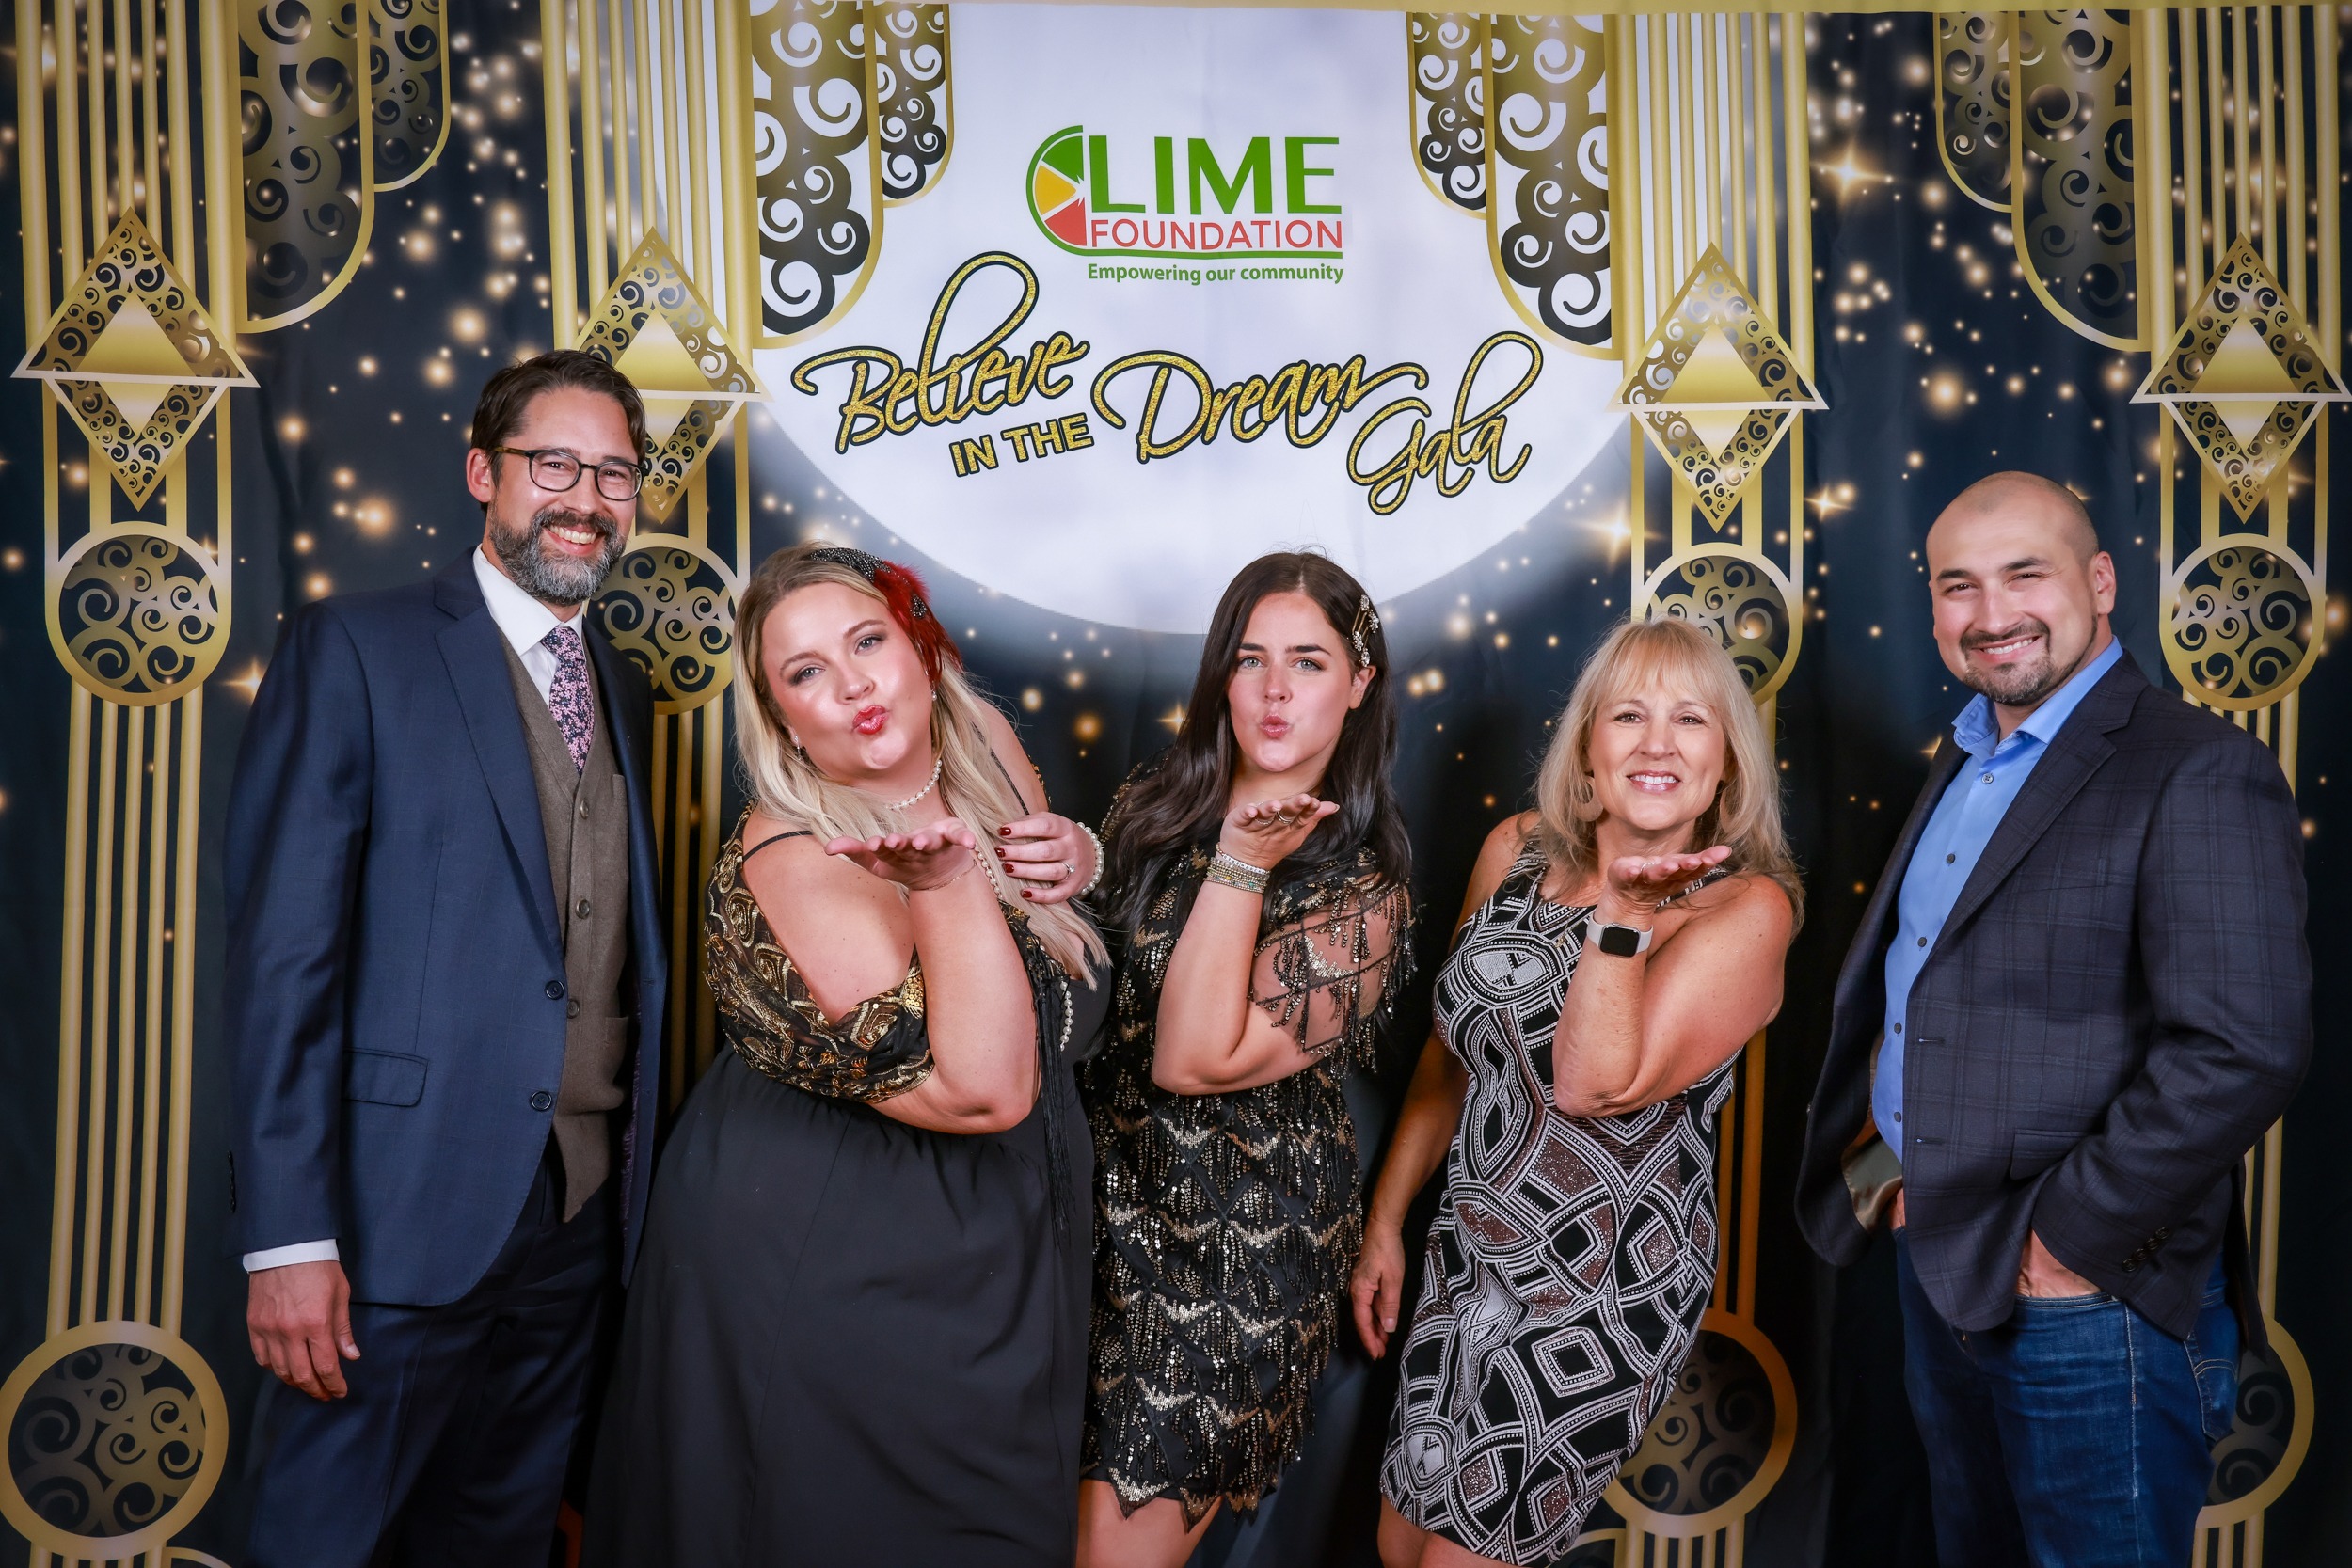 A group of people posing for a photo in front of a gilded backdrop at a Santa Rosa Non-Profit event.